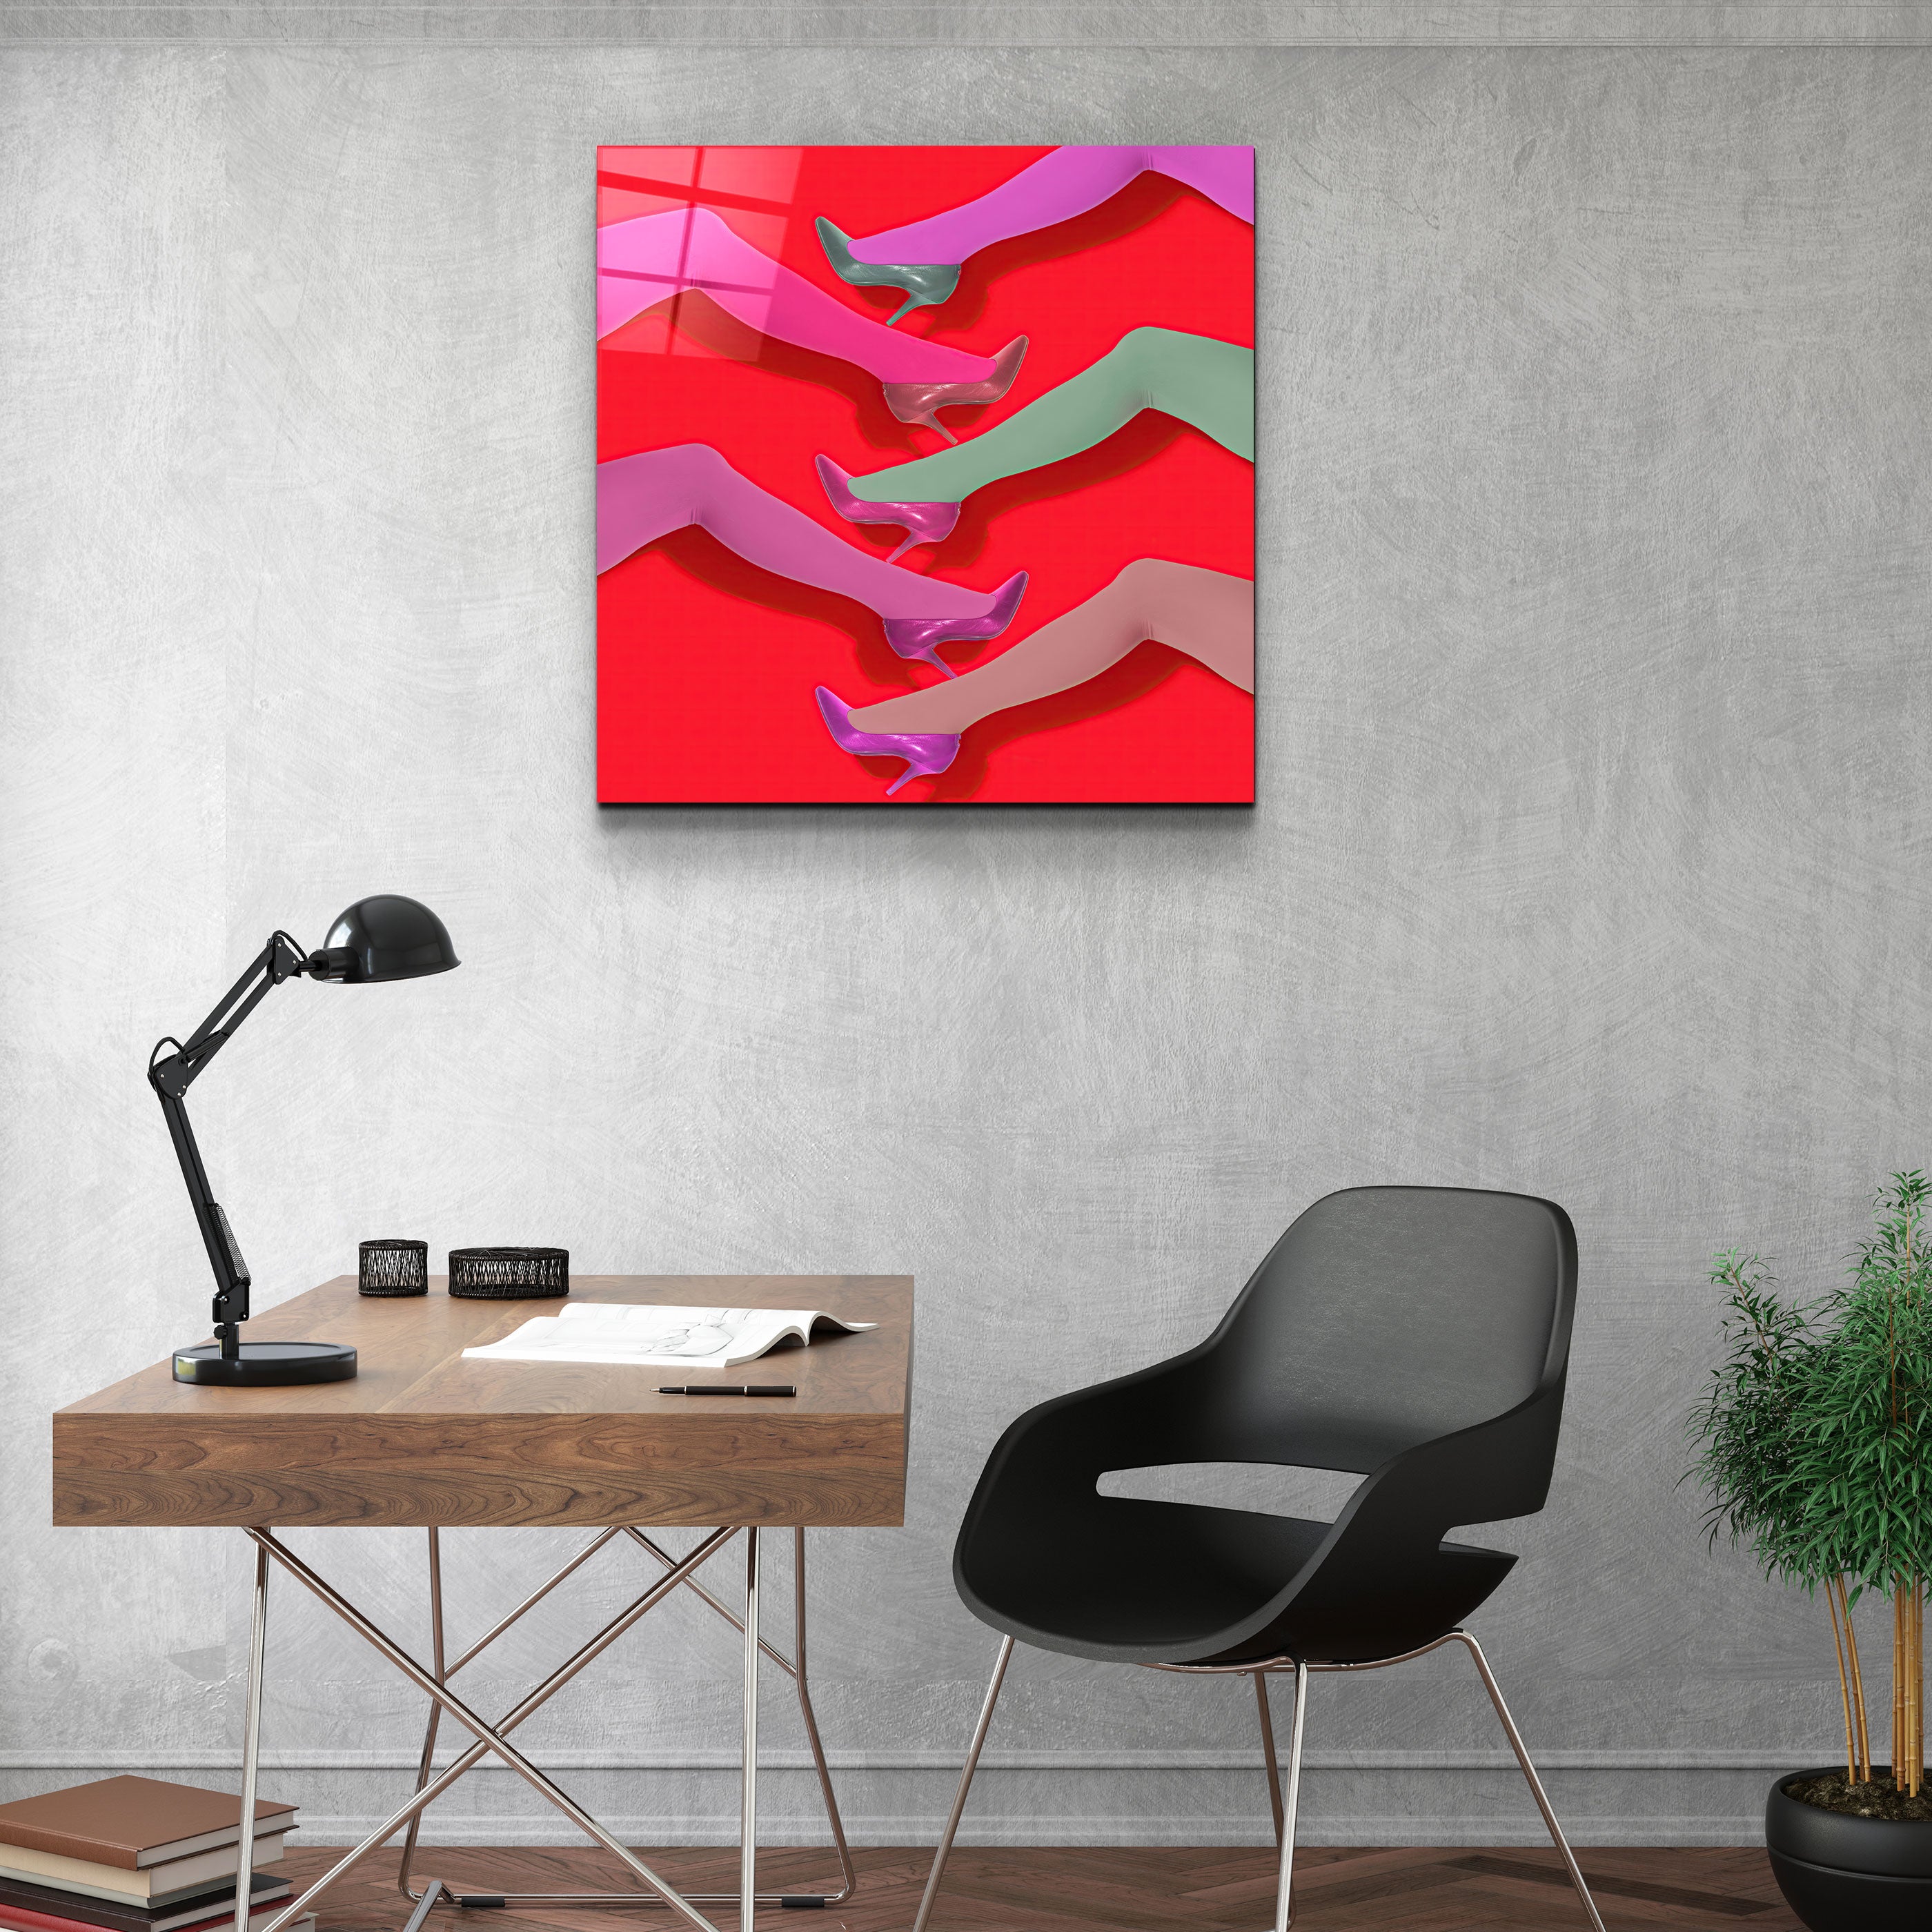 ."Legs with Retro Socks". Designer's Collection Glass Wall Art